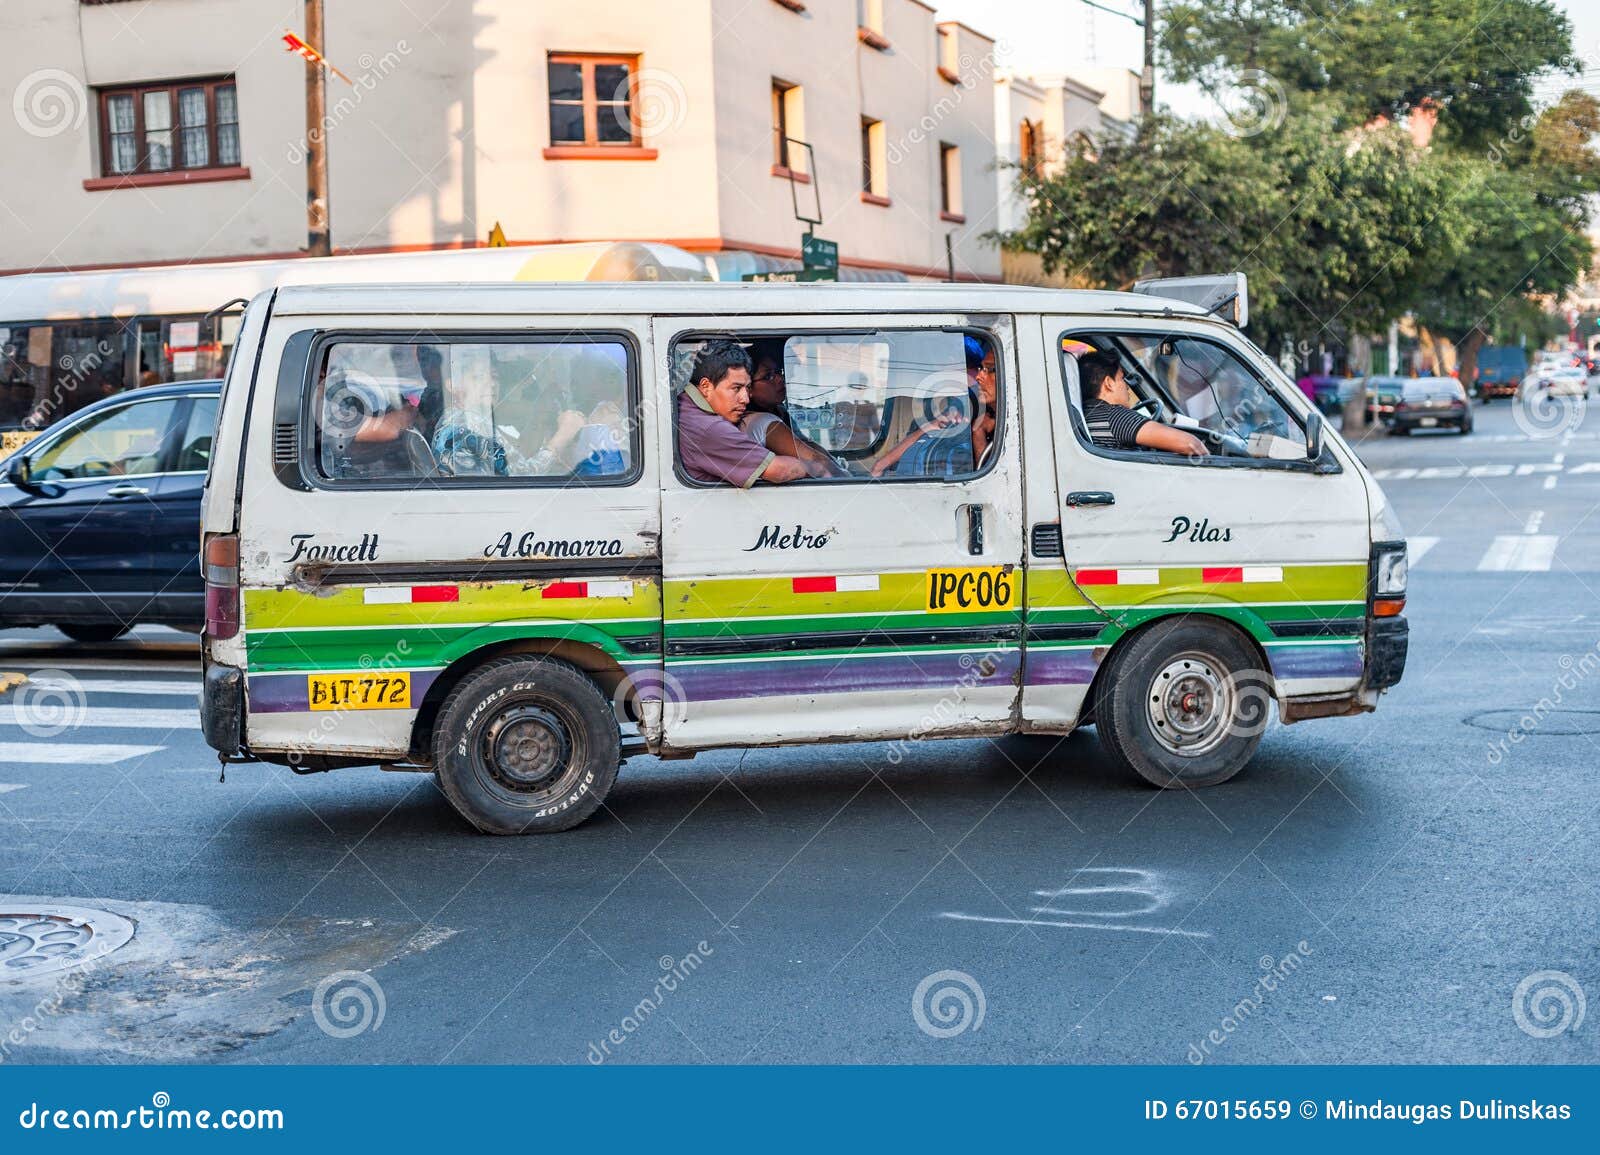 LIMA, PERU - APRIL 12, 2013: Old Vans Bus in Lima Street and Extremely Full of People. Faucett - Pilas Route. Editorial Stock Image - Image of driver, 67015659